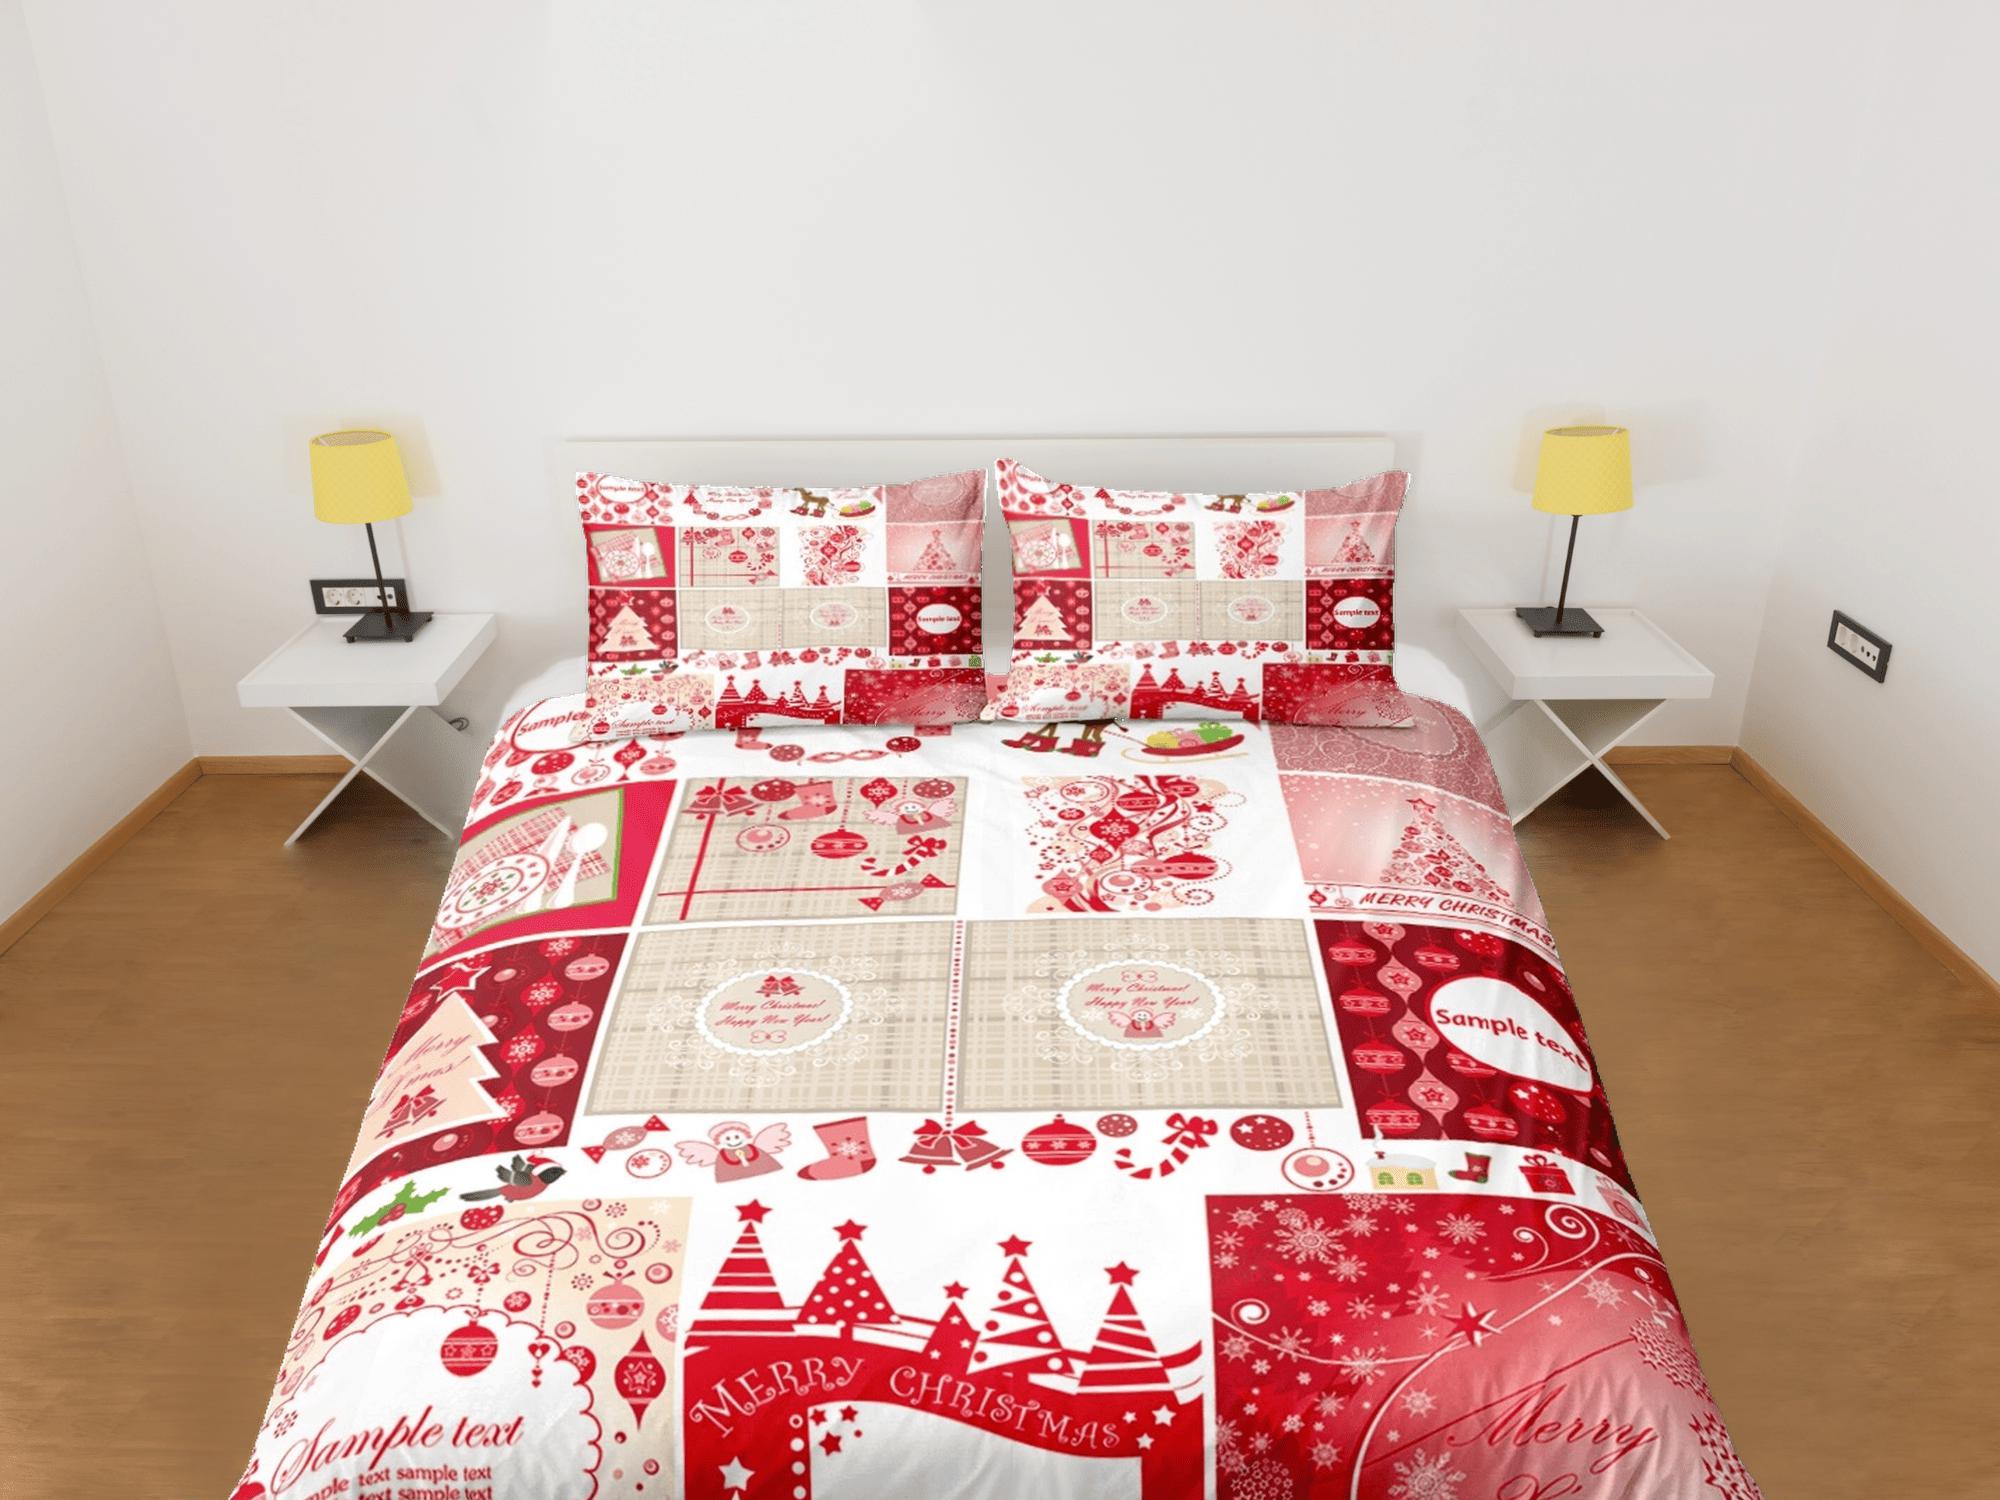 daintyduvet Red patchwork Christmas bedding & pillowcase holiday gift duvet cover king queen full twin toddler bedding baby Christmas farmhouse decor